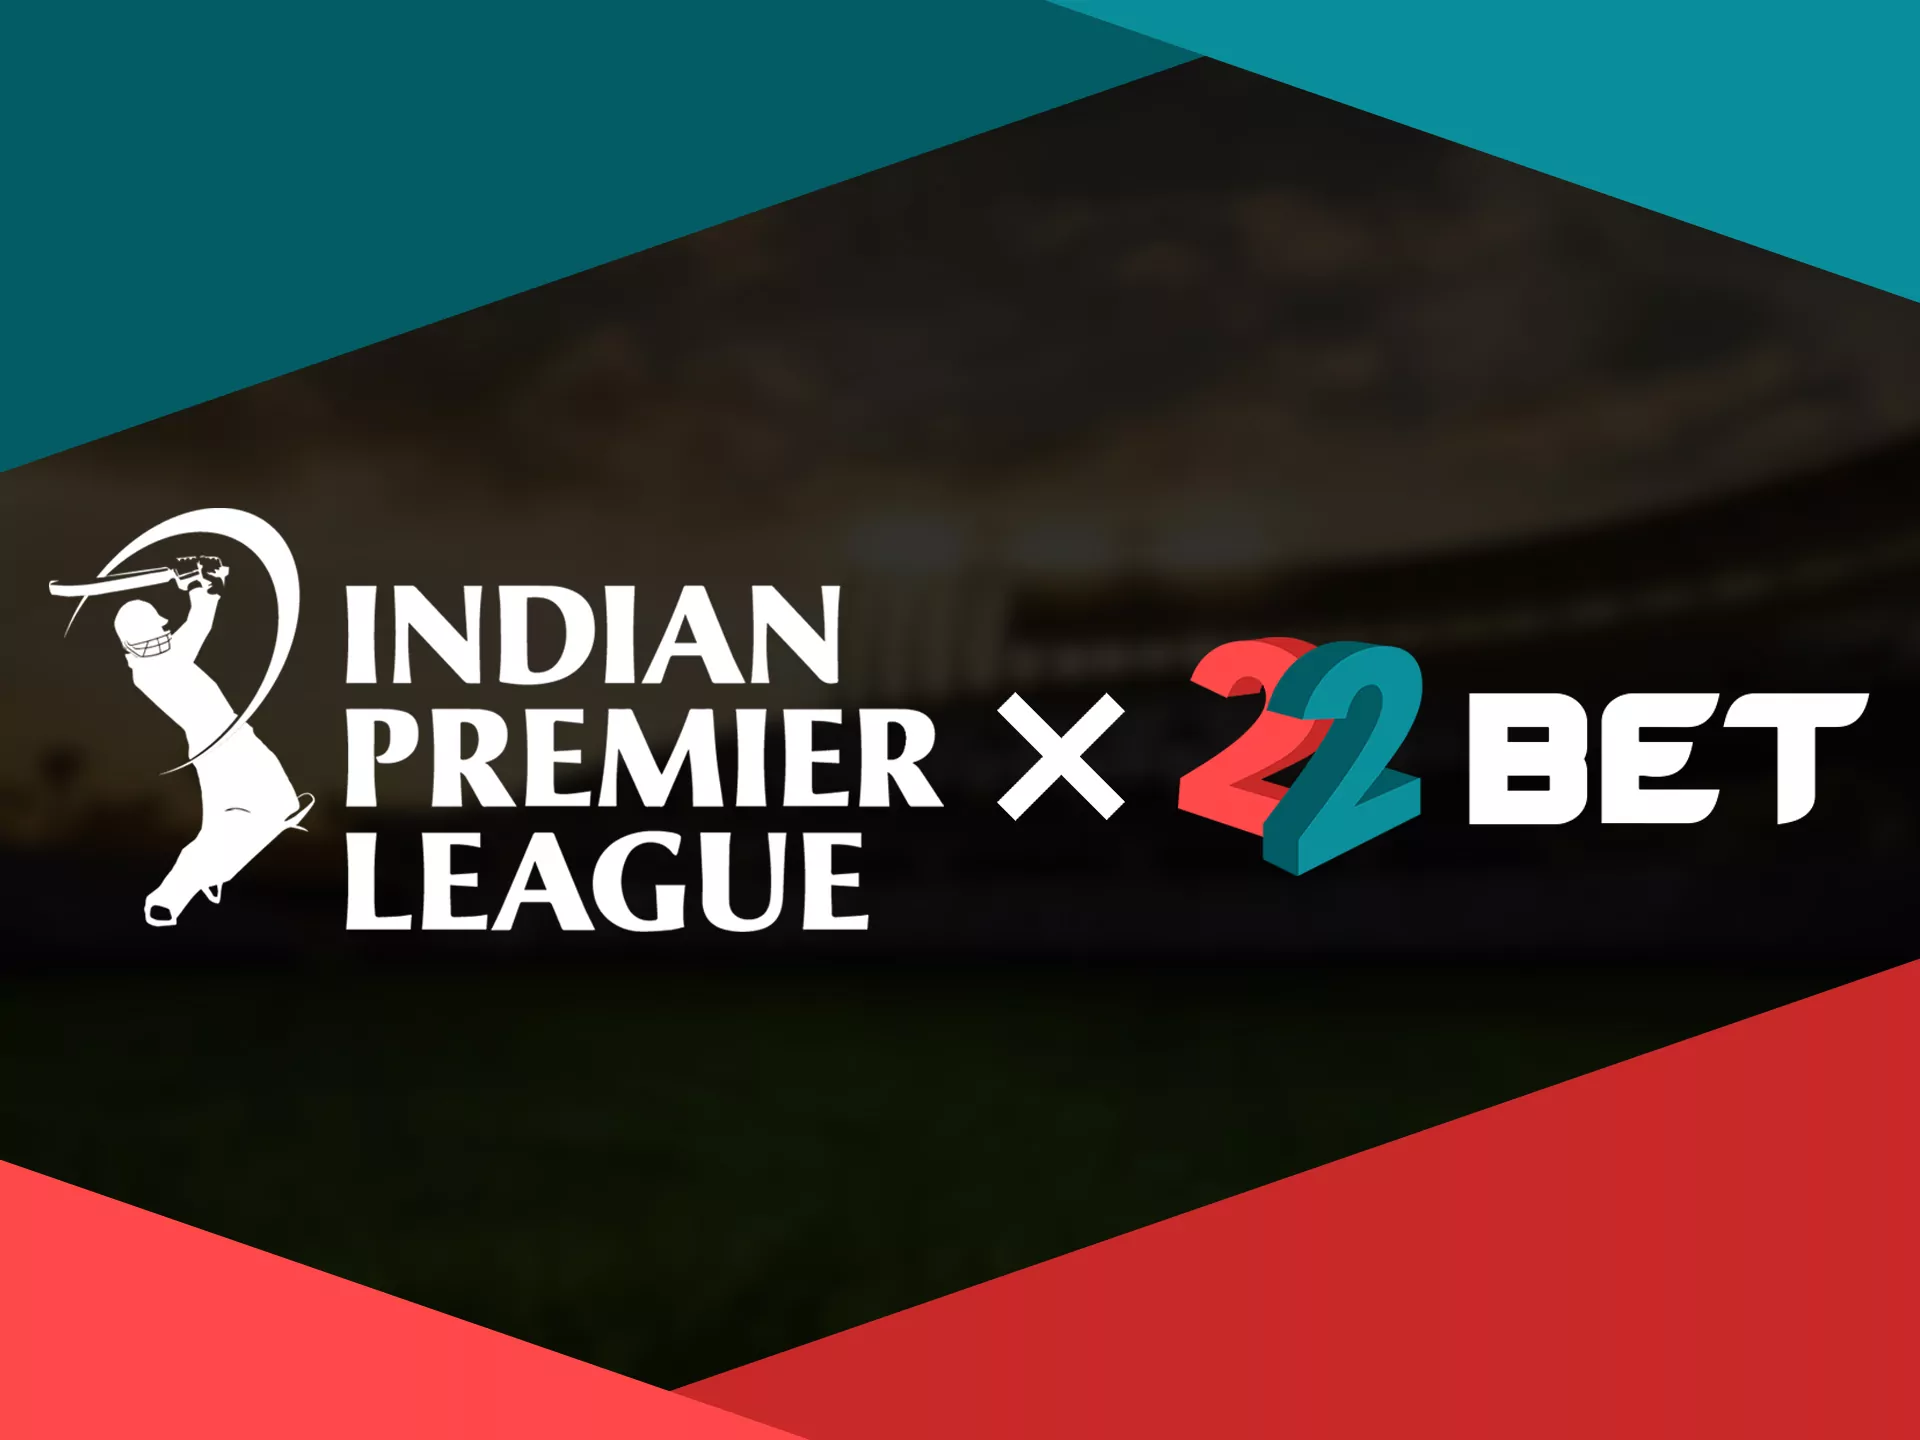 Bet on best cricket event in India at 22bet.